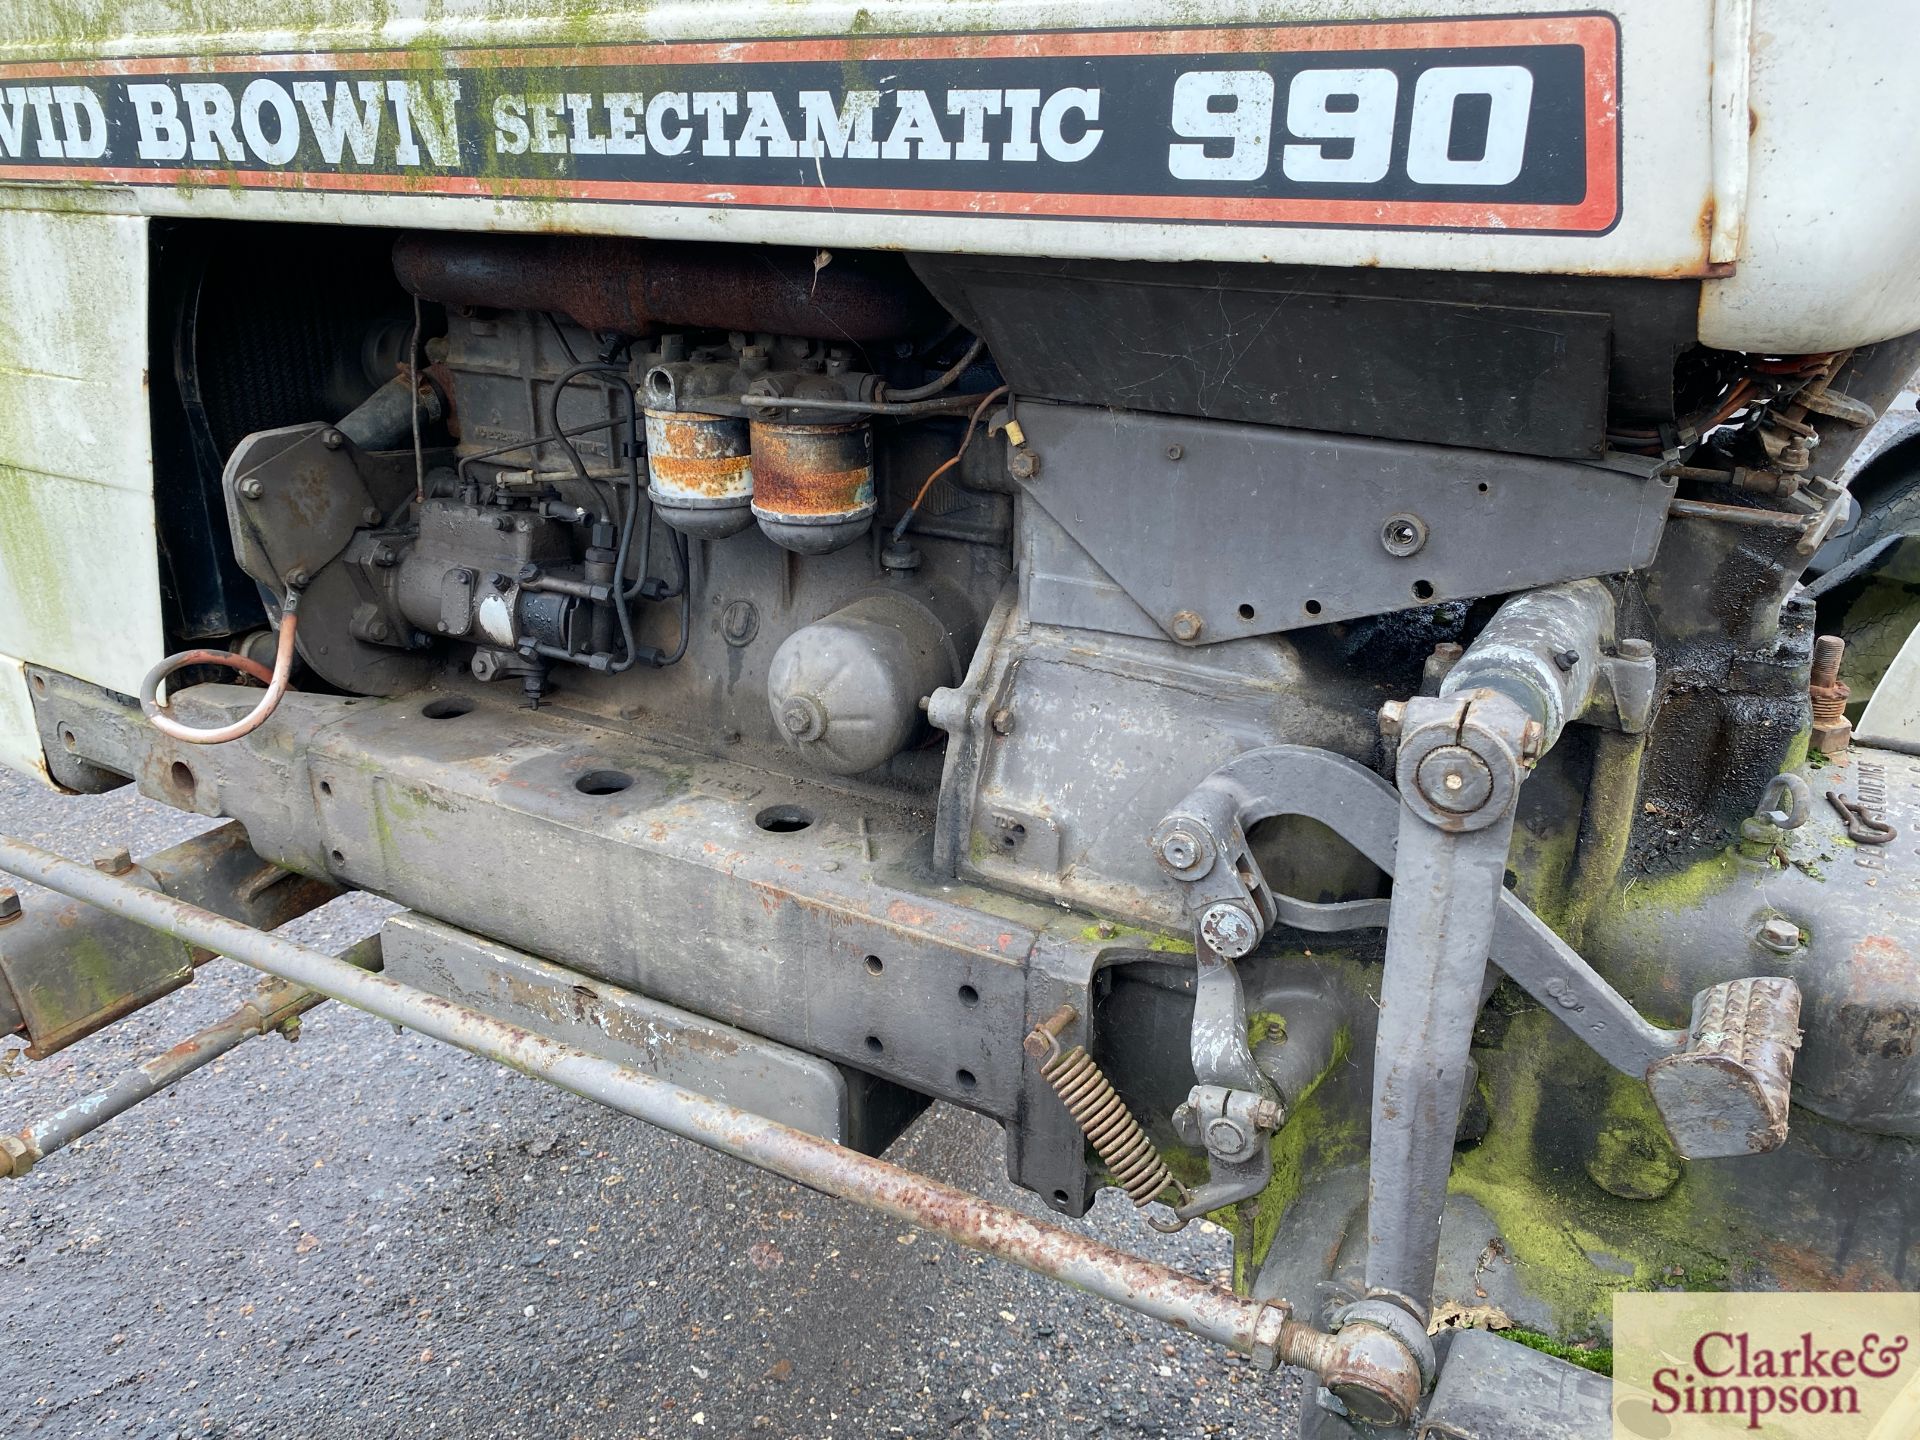 David Brown 990 Selectamatic 2WD tractor. Registration DUE 781D (no paperwork). Serial number 990A/ - Image 24 of 31